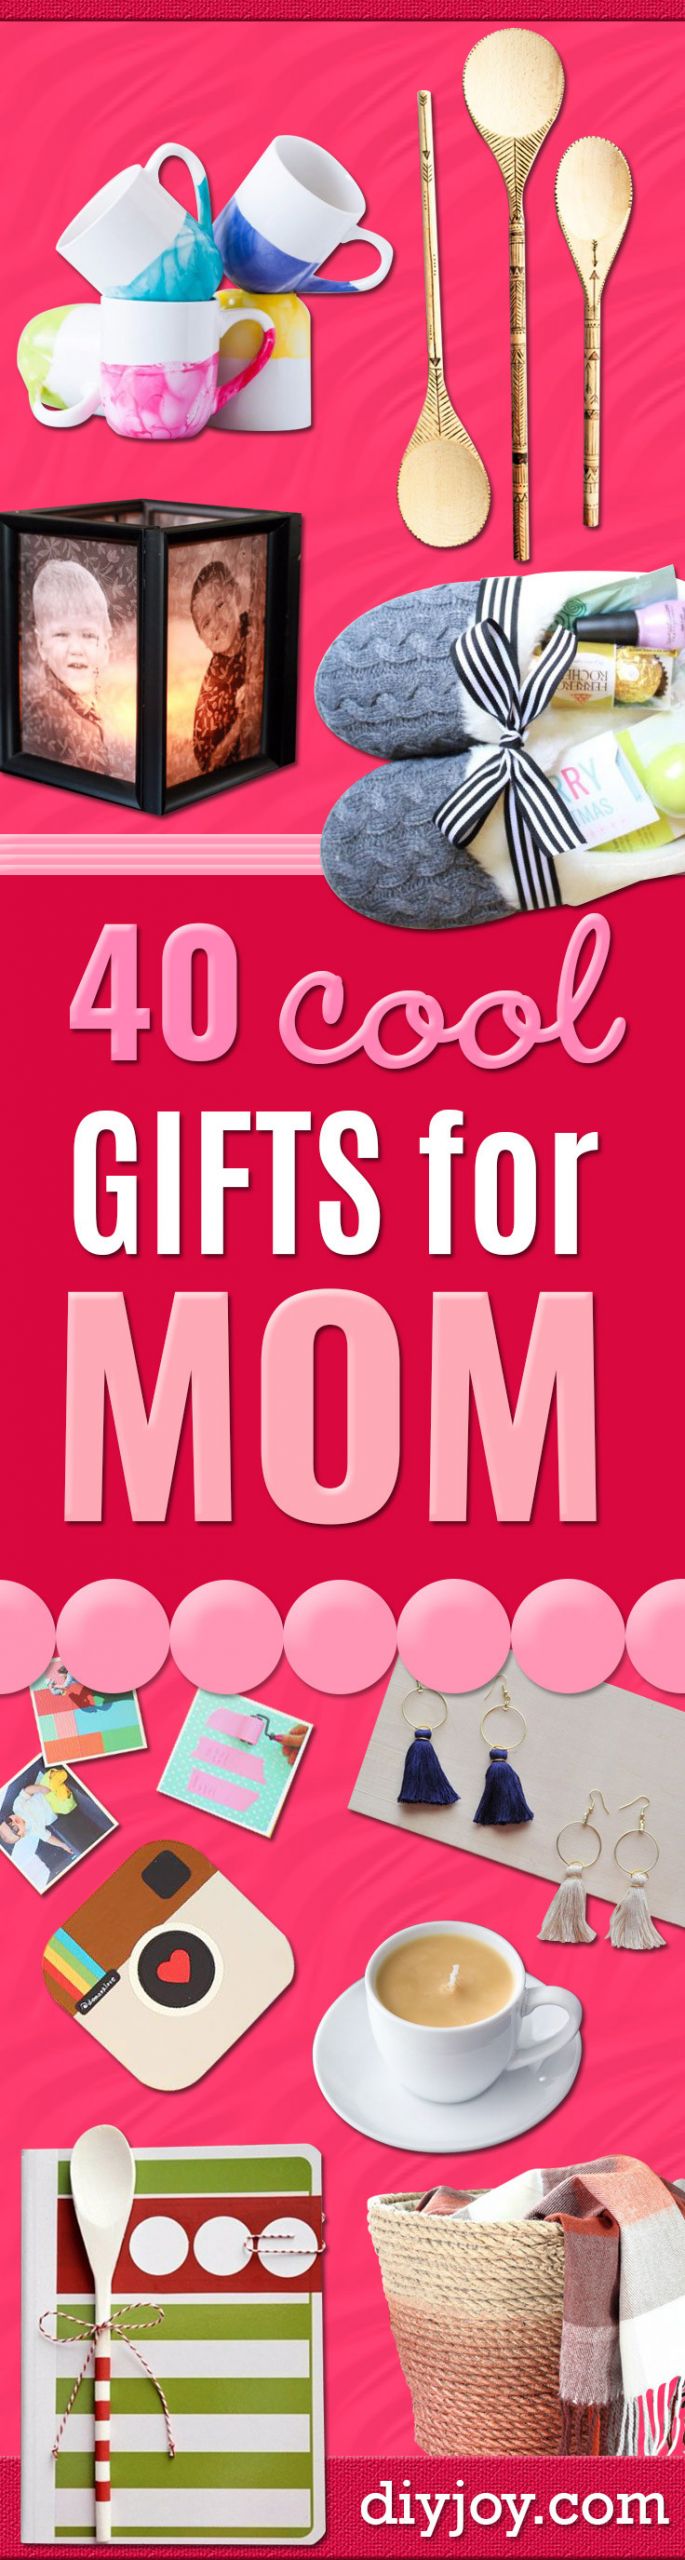 DIY Mom Birthday Gift
 40 Coolest Gifts To Make for Mom